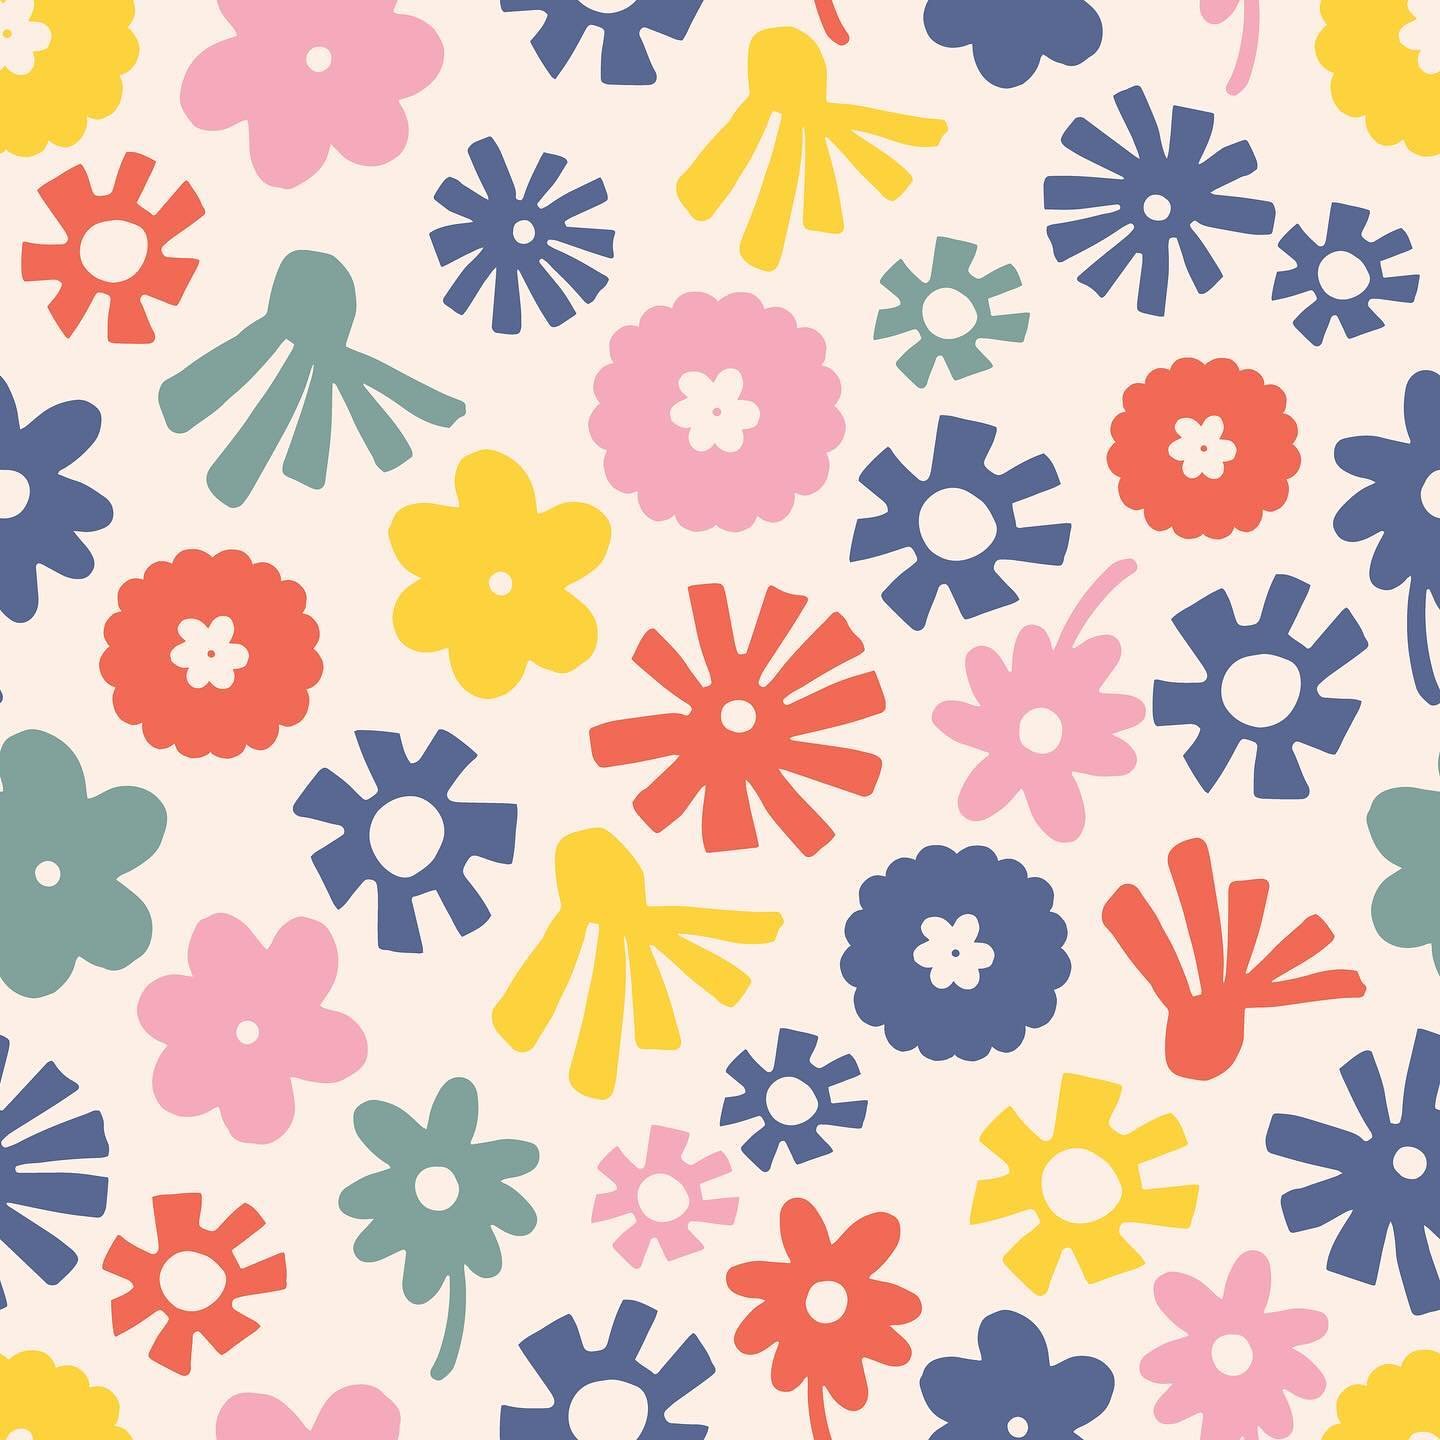 Hi. This playful pattern is my entry to @spoonflower  Party Wall Wallpaper Design Challenge. The ask was to design a wall paper that is bold and bright with cheerful motifs that would be good in a playroom or a backdrop for a fun party. I am happy wi